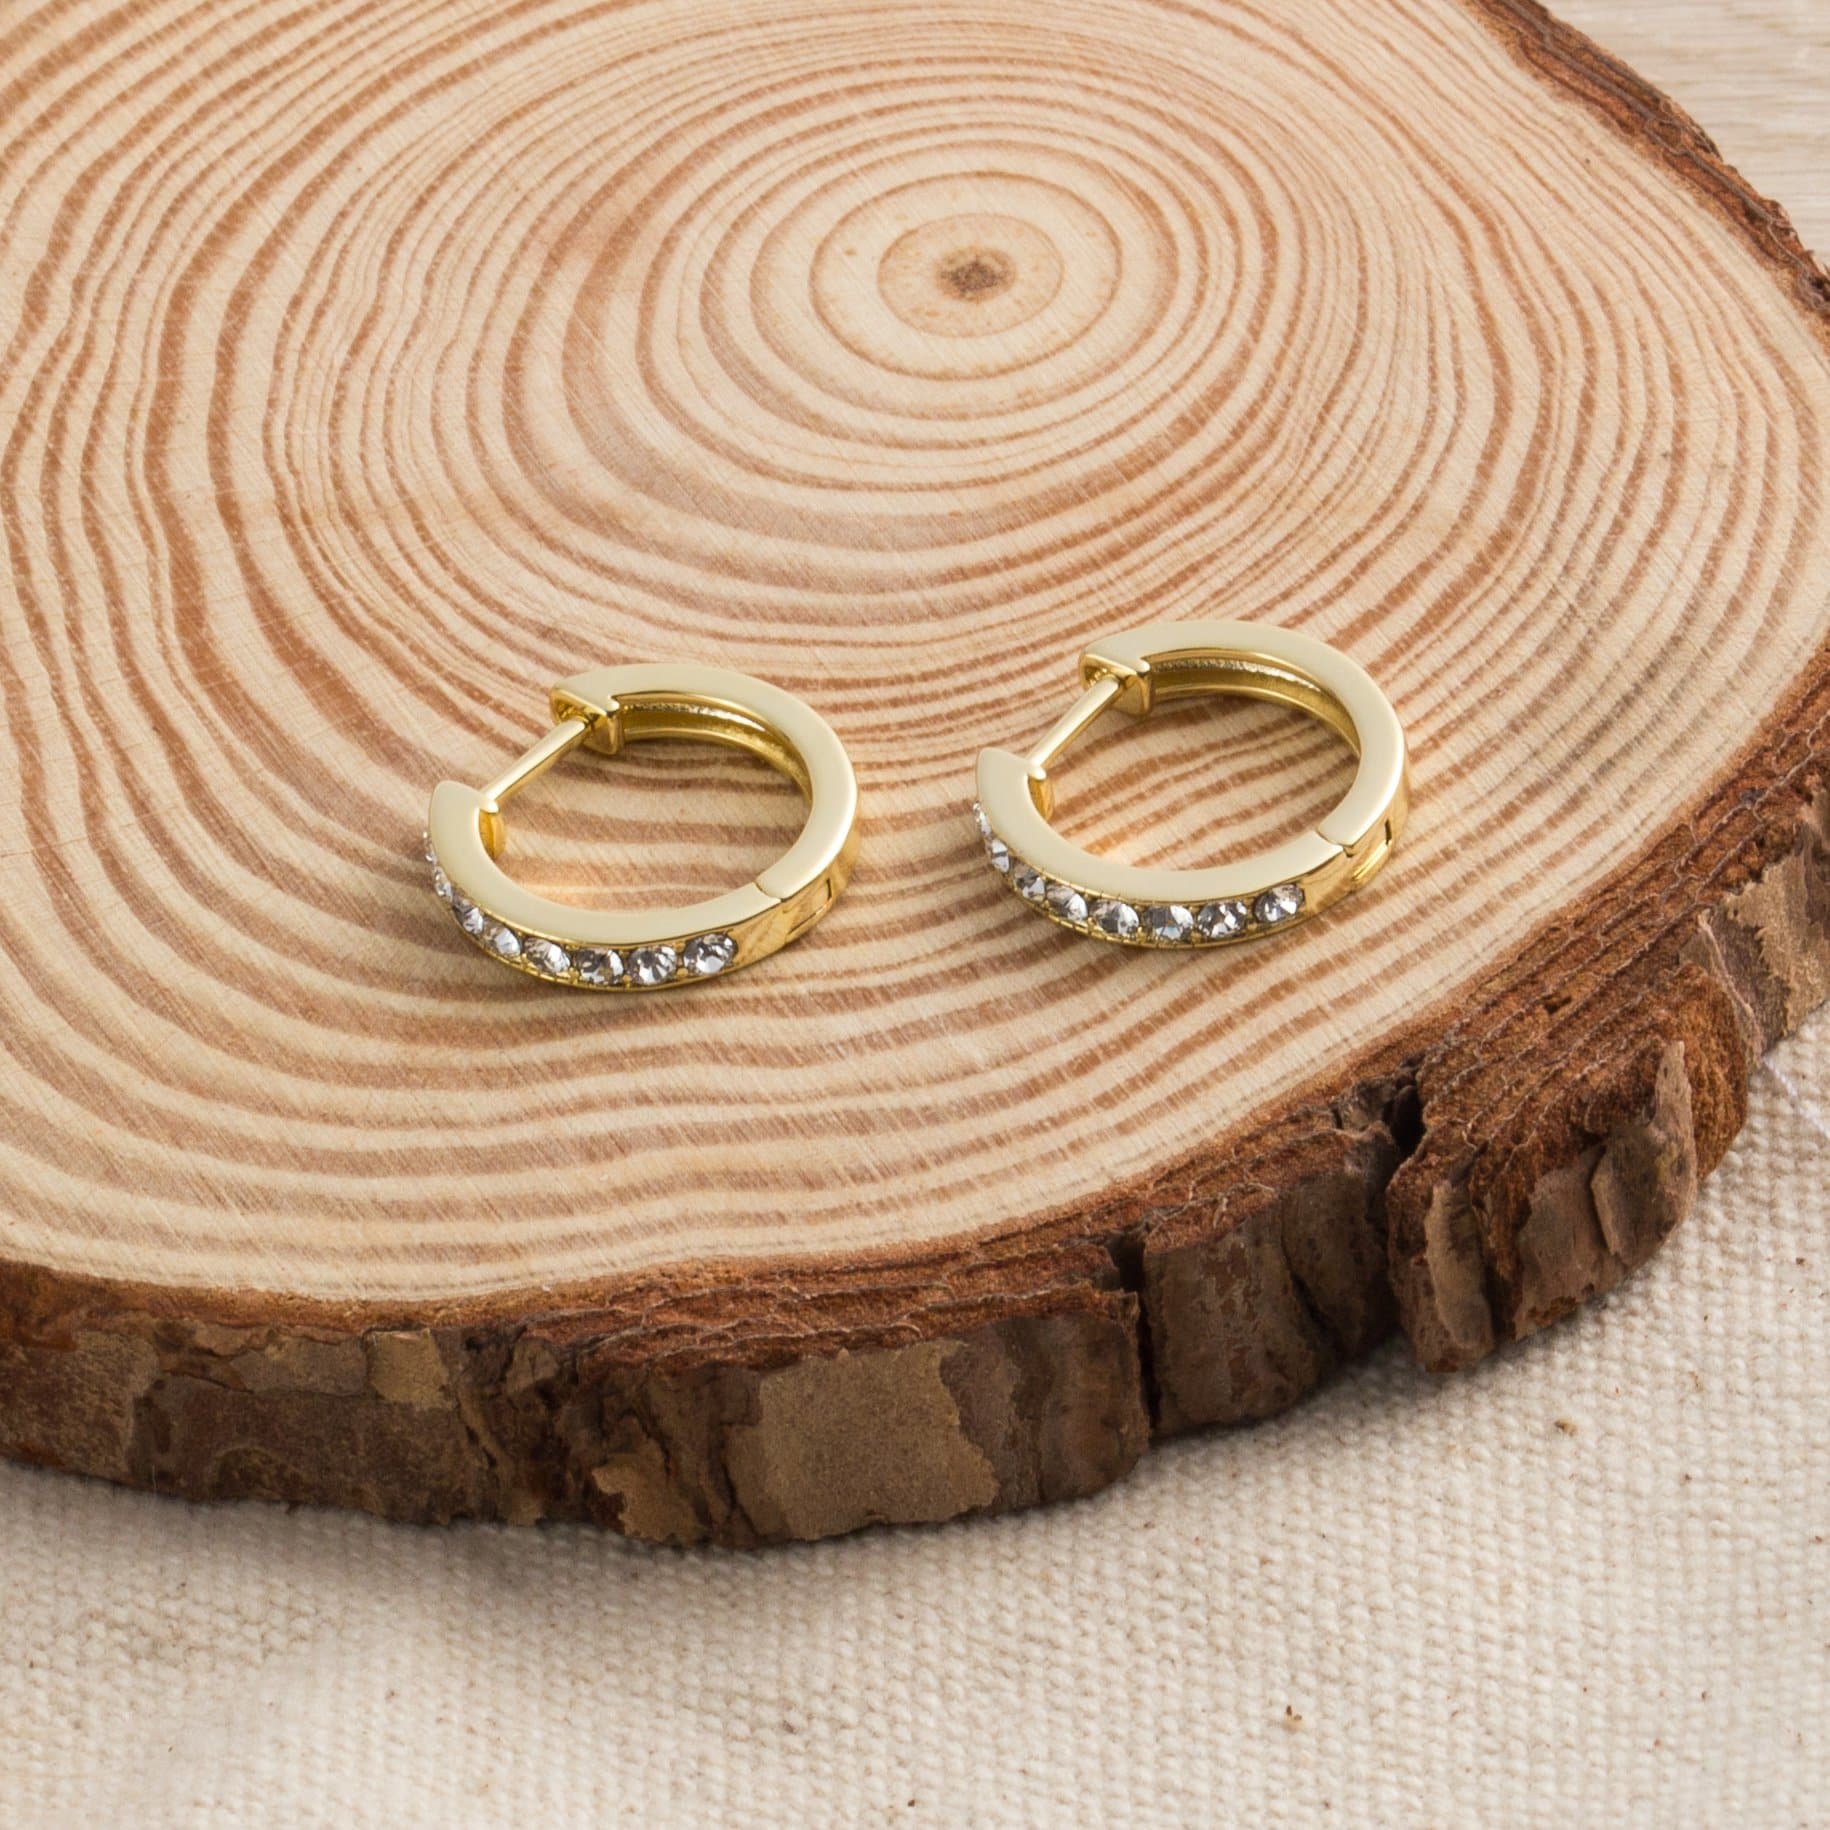 Gold Plated Hoop Earrings Created with Zircondia® Crystals